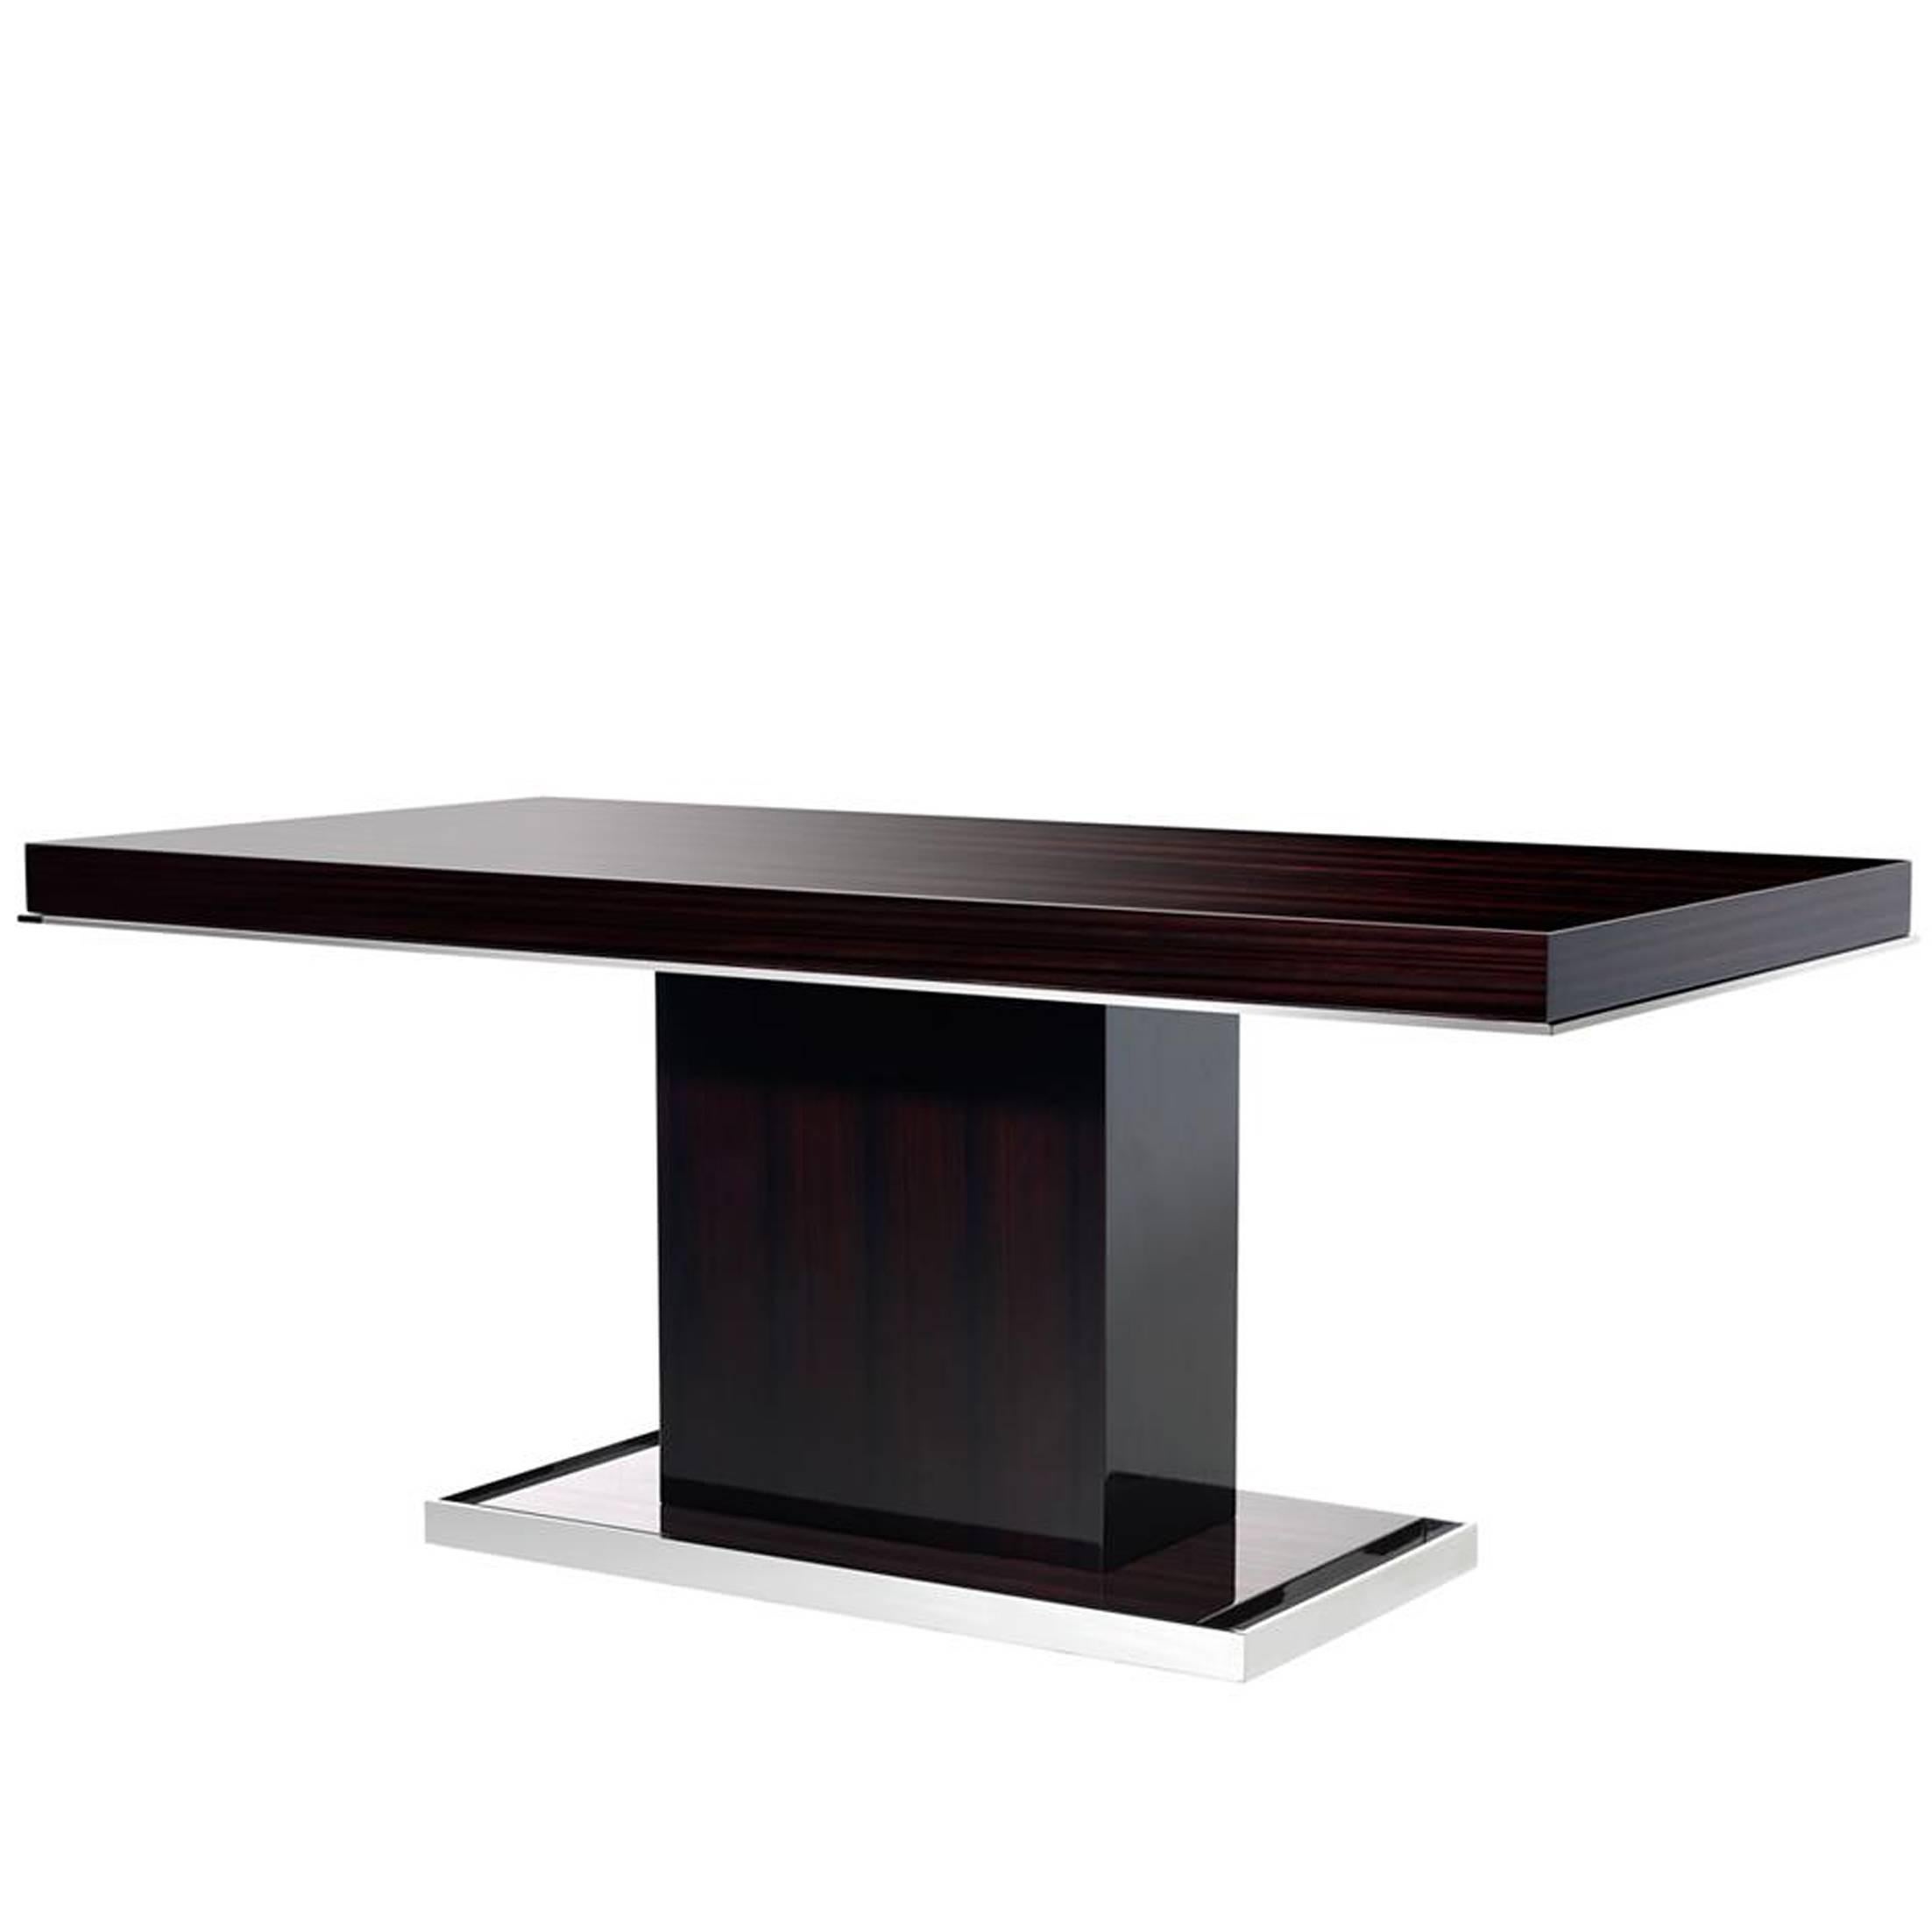 Chicago Dinning Table in High Gloss Ebony Finish